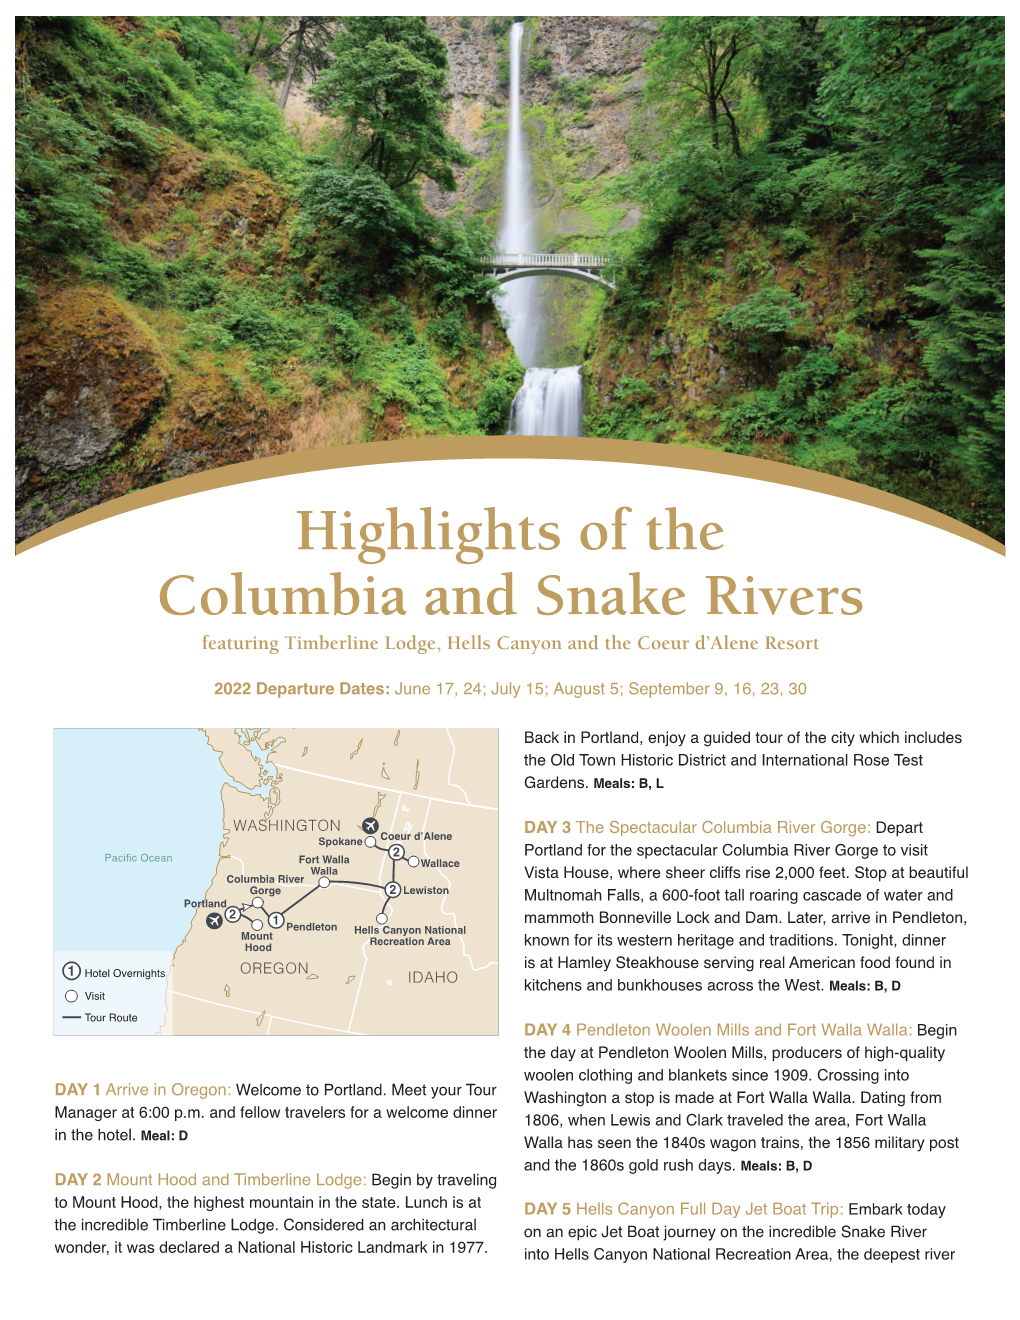 Highlights of the Columbia and Snake Rivers Featuring Timberline Lodge, Hells Canyon and the Coeur D’Alene Resort